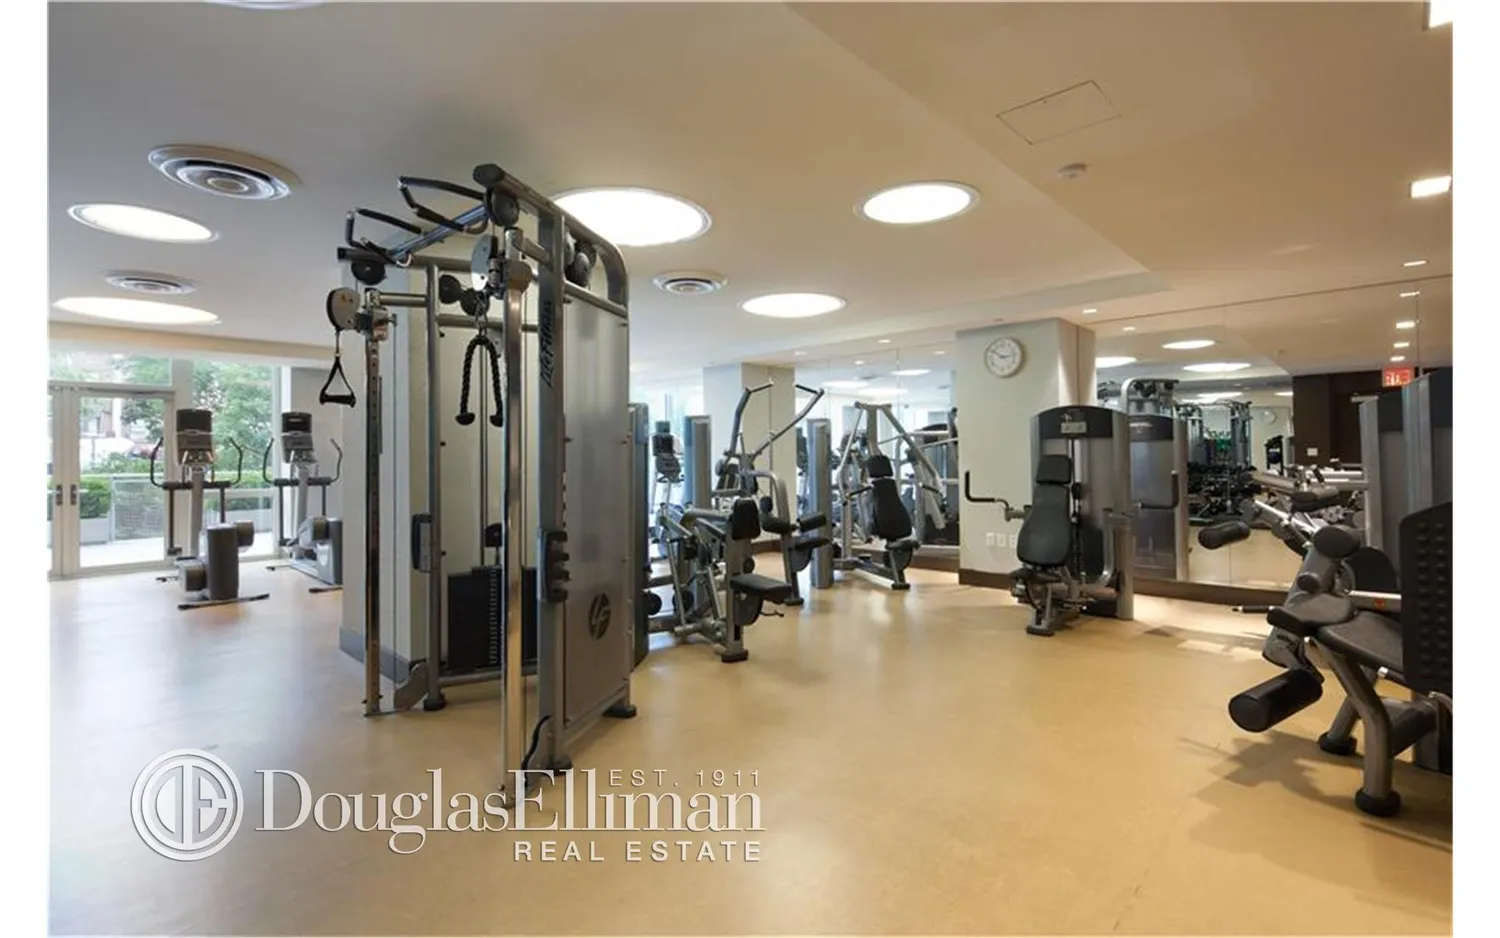 State of the art fitness center w/ terrace